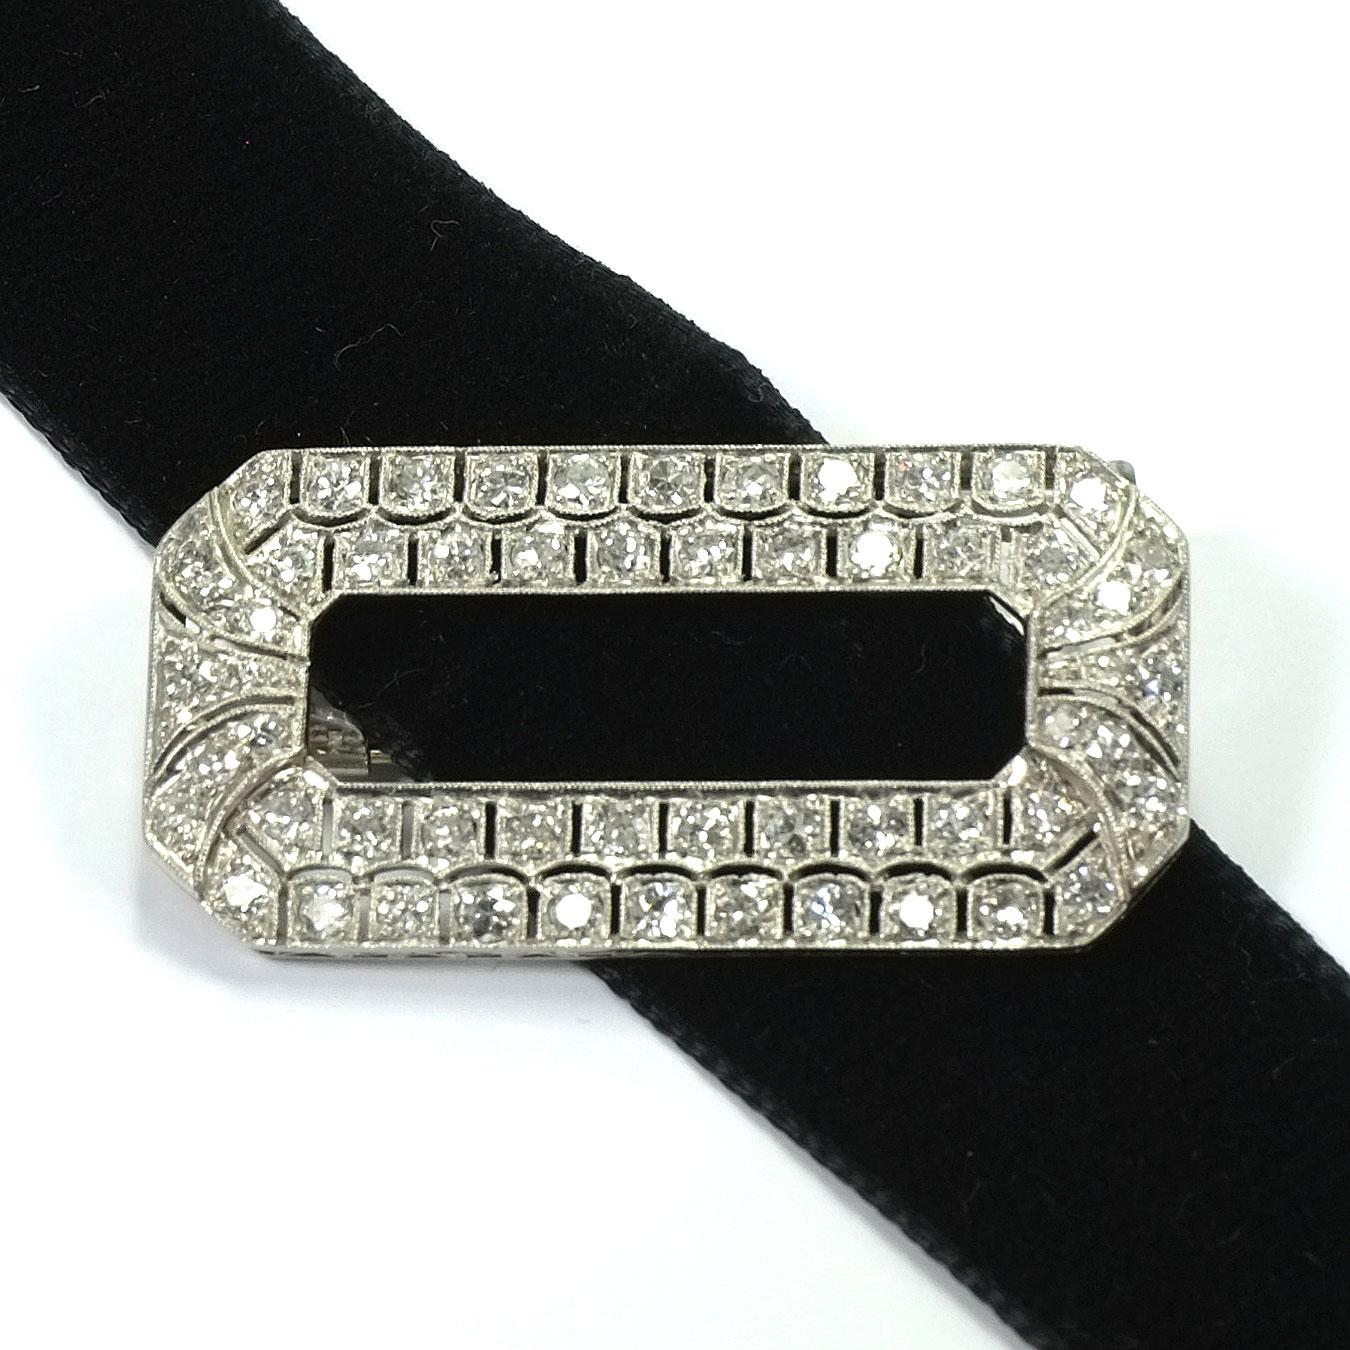 Art Deco 2 Carat Diamond Platinum Buckle Brooch, circa 1920

Decorative platinum brooch in the shape of a buckle, decorated on the sides with stylized palmettes and set with a total of 2 ct sparkling diamonds. Rear needle with plug